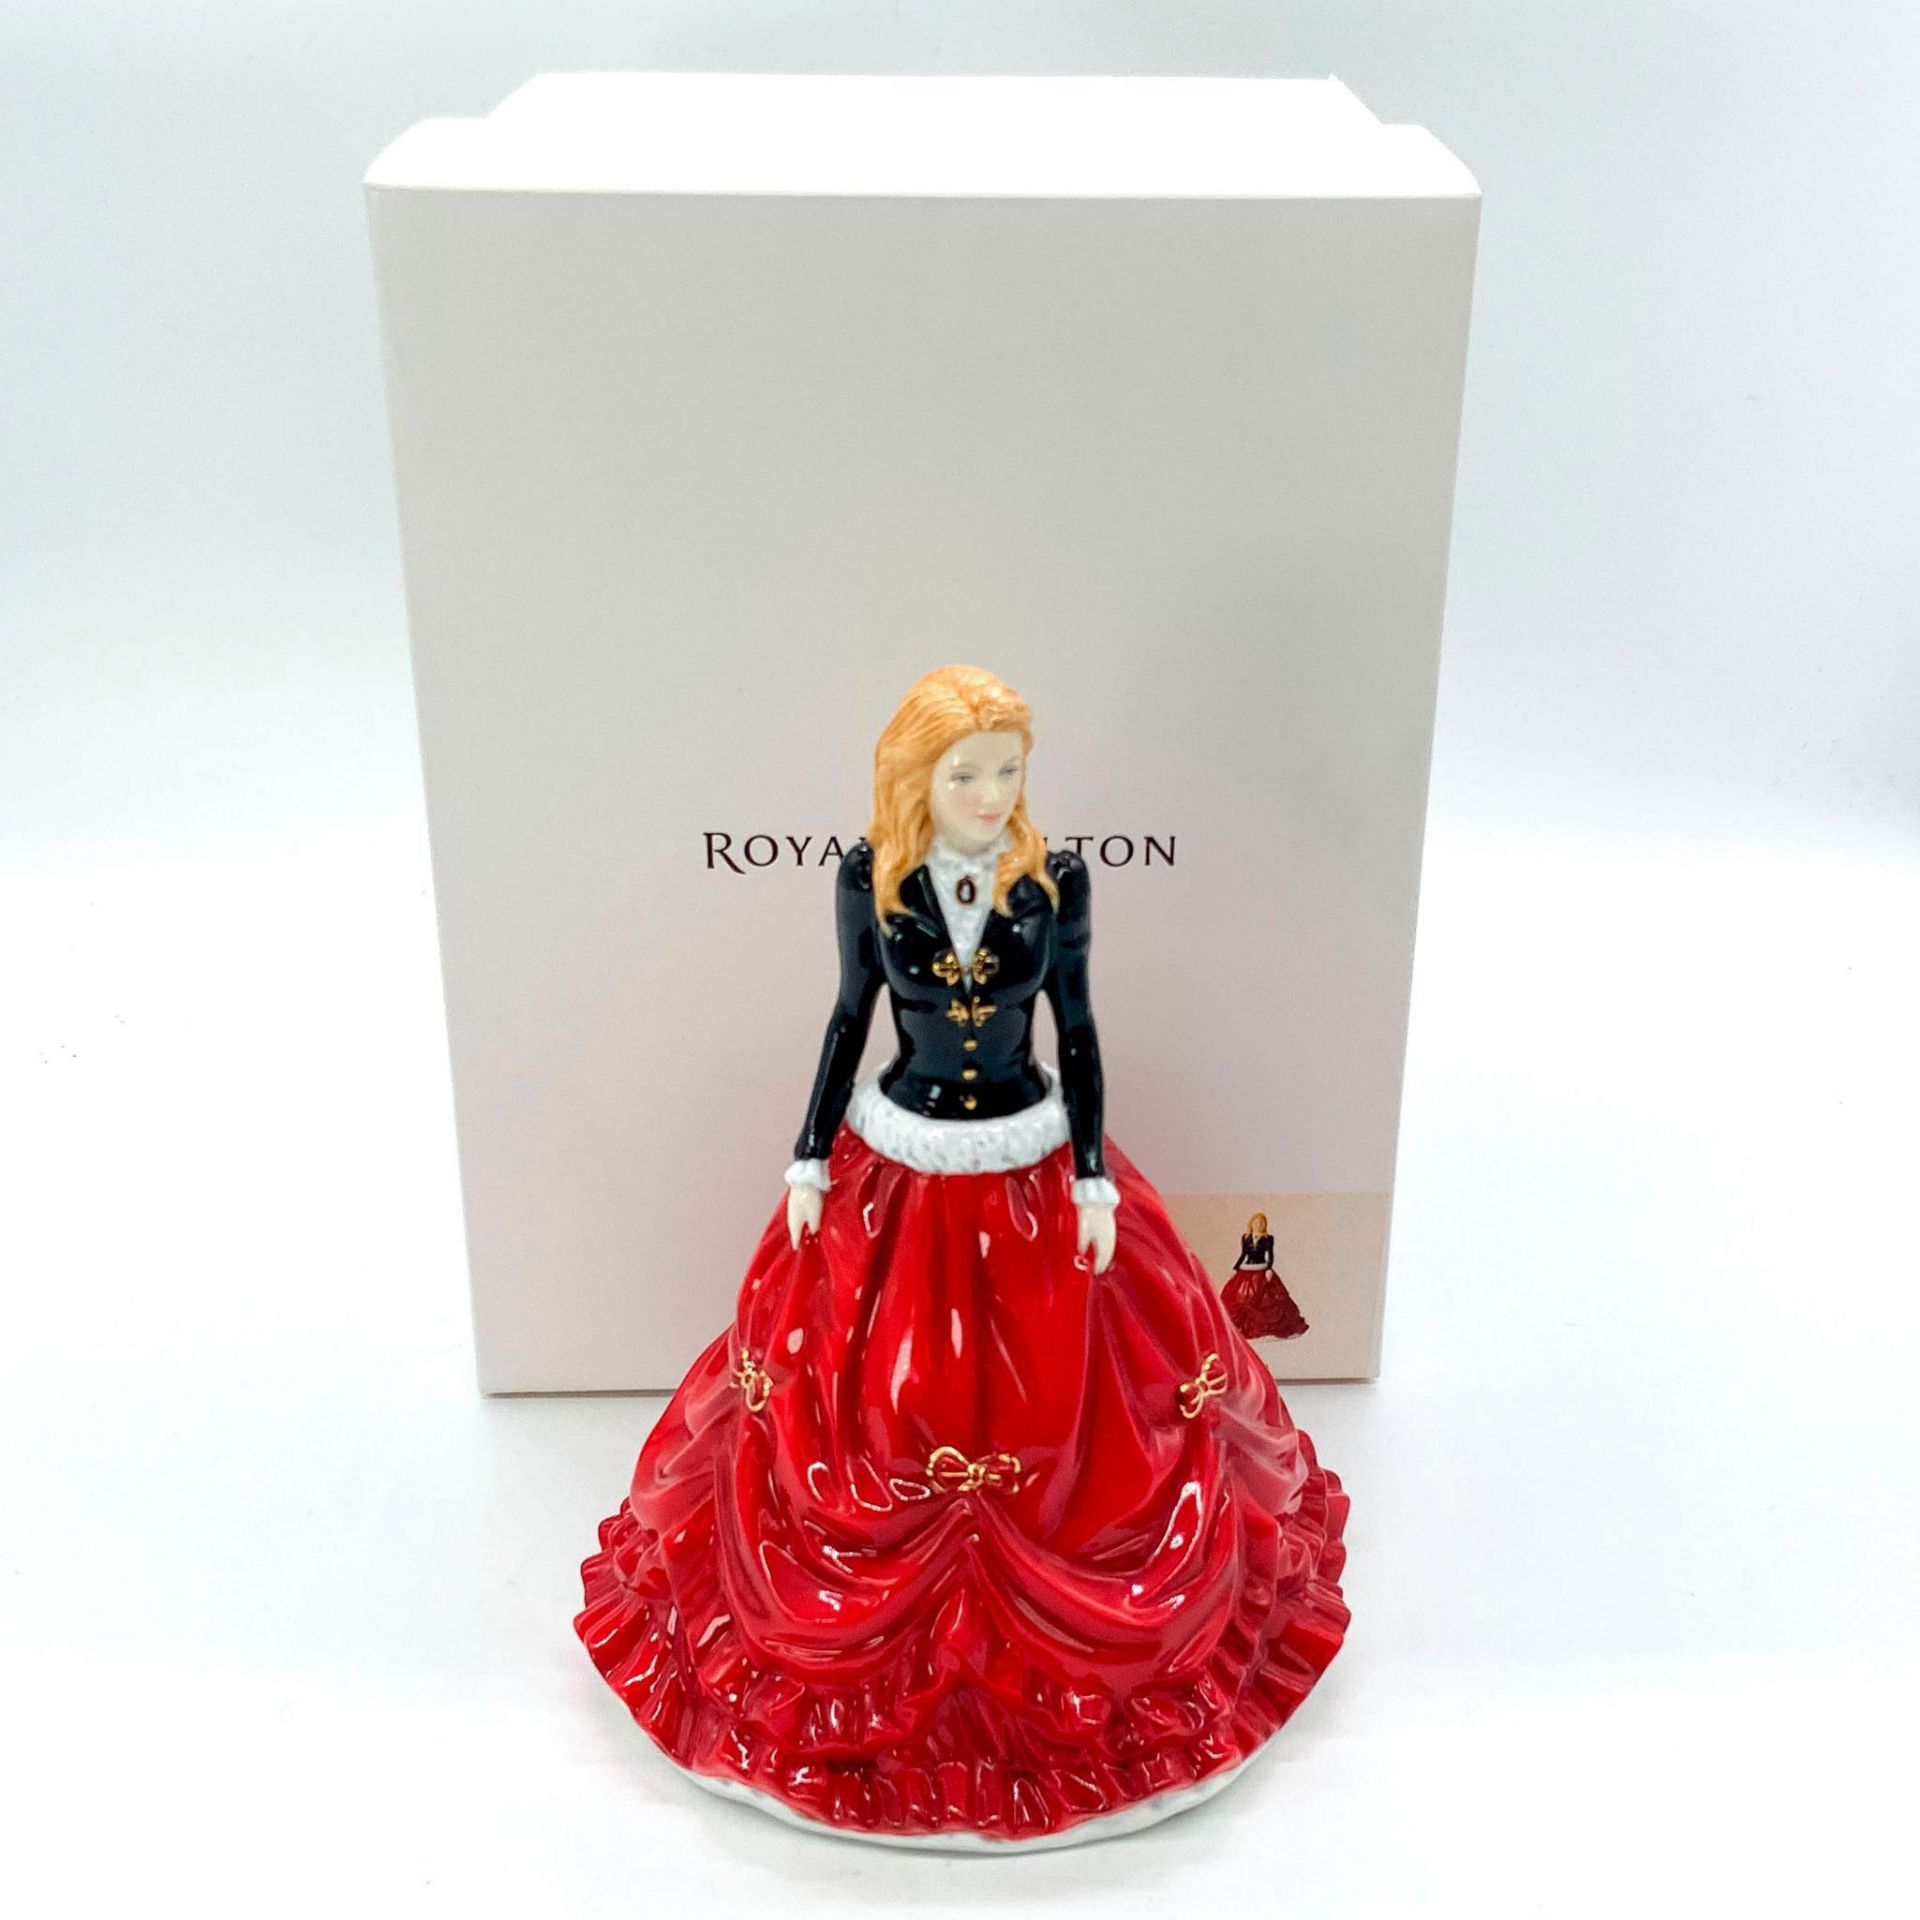 Festive Stroll 2017 Christmas Day Petite of the Year - HN5854 - Royal Doulton Figurine - Image 2 of 4